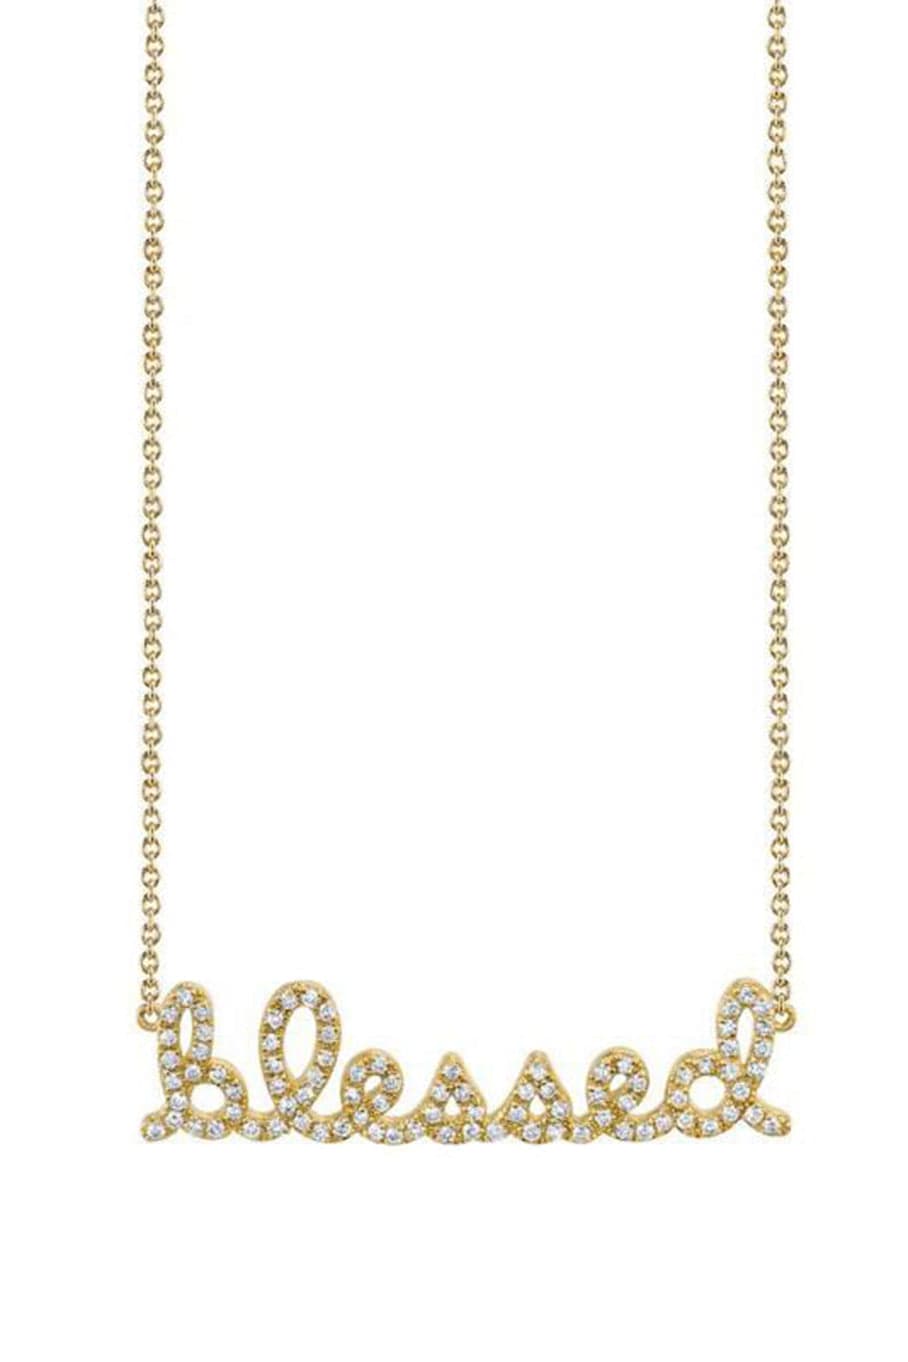 SYDNEY EVAN-Pave Blessed Script Necklace-YELLOW GOLD